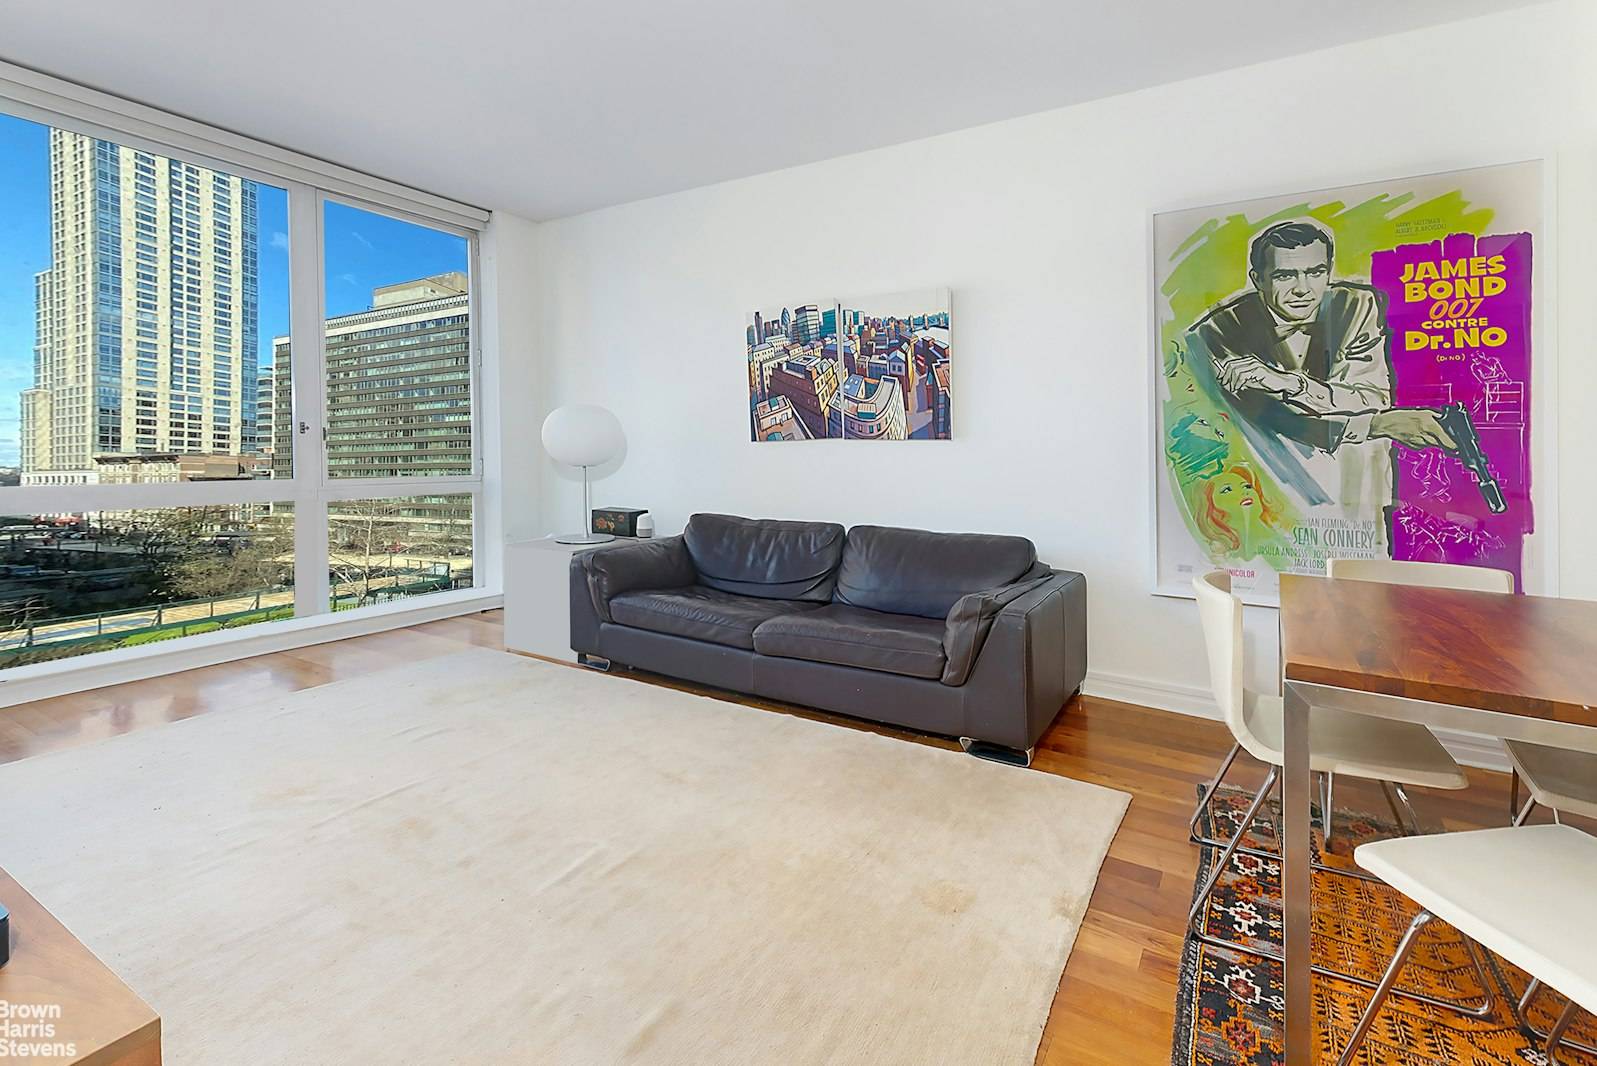 This bright and quit true bedroom is located in 3 blocks away from 72street 1, 2, 3 subway.